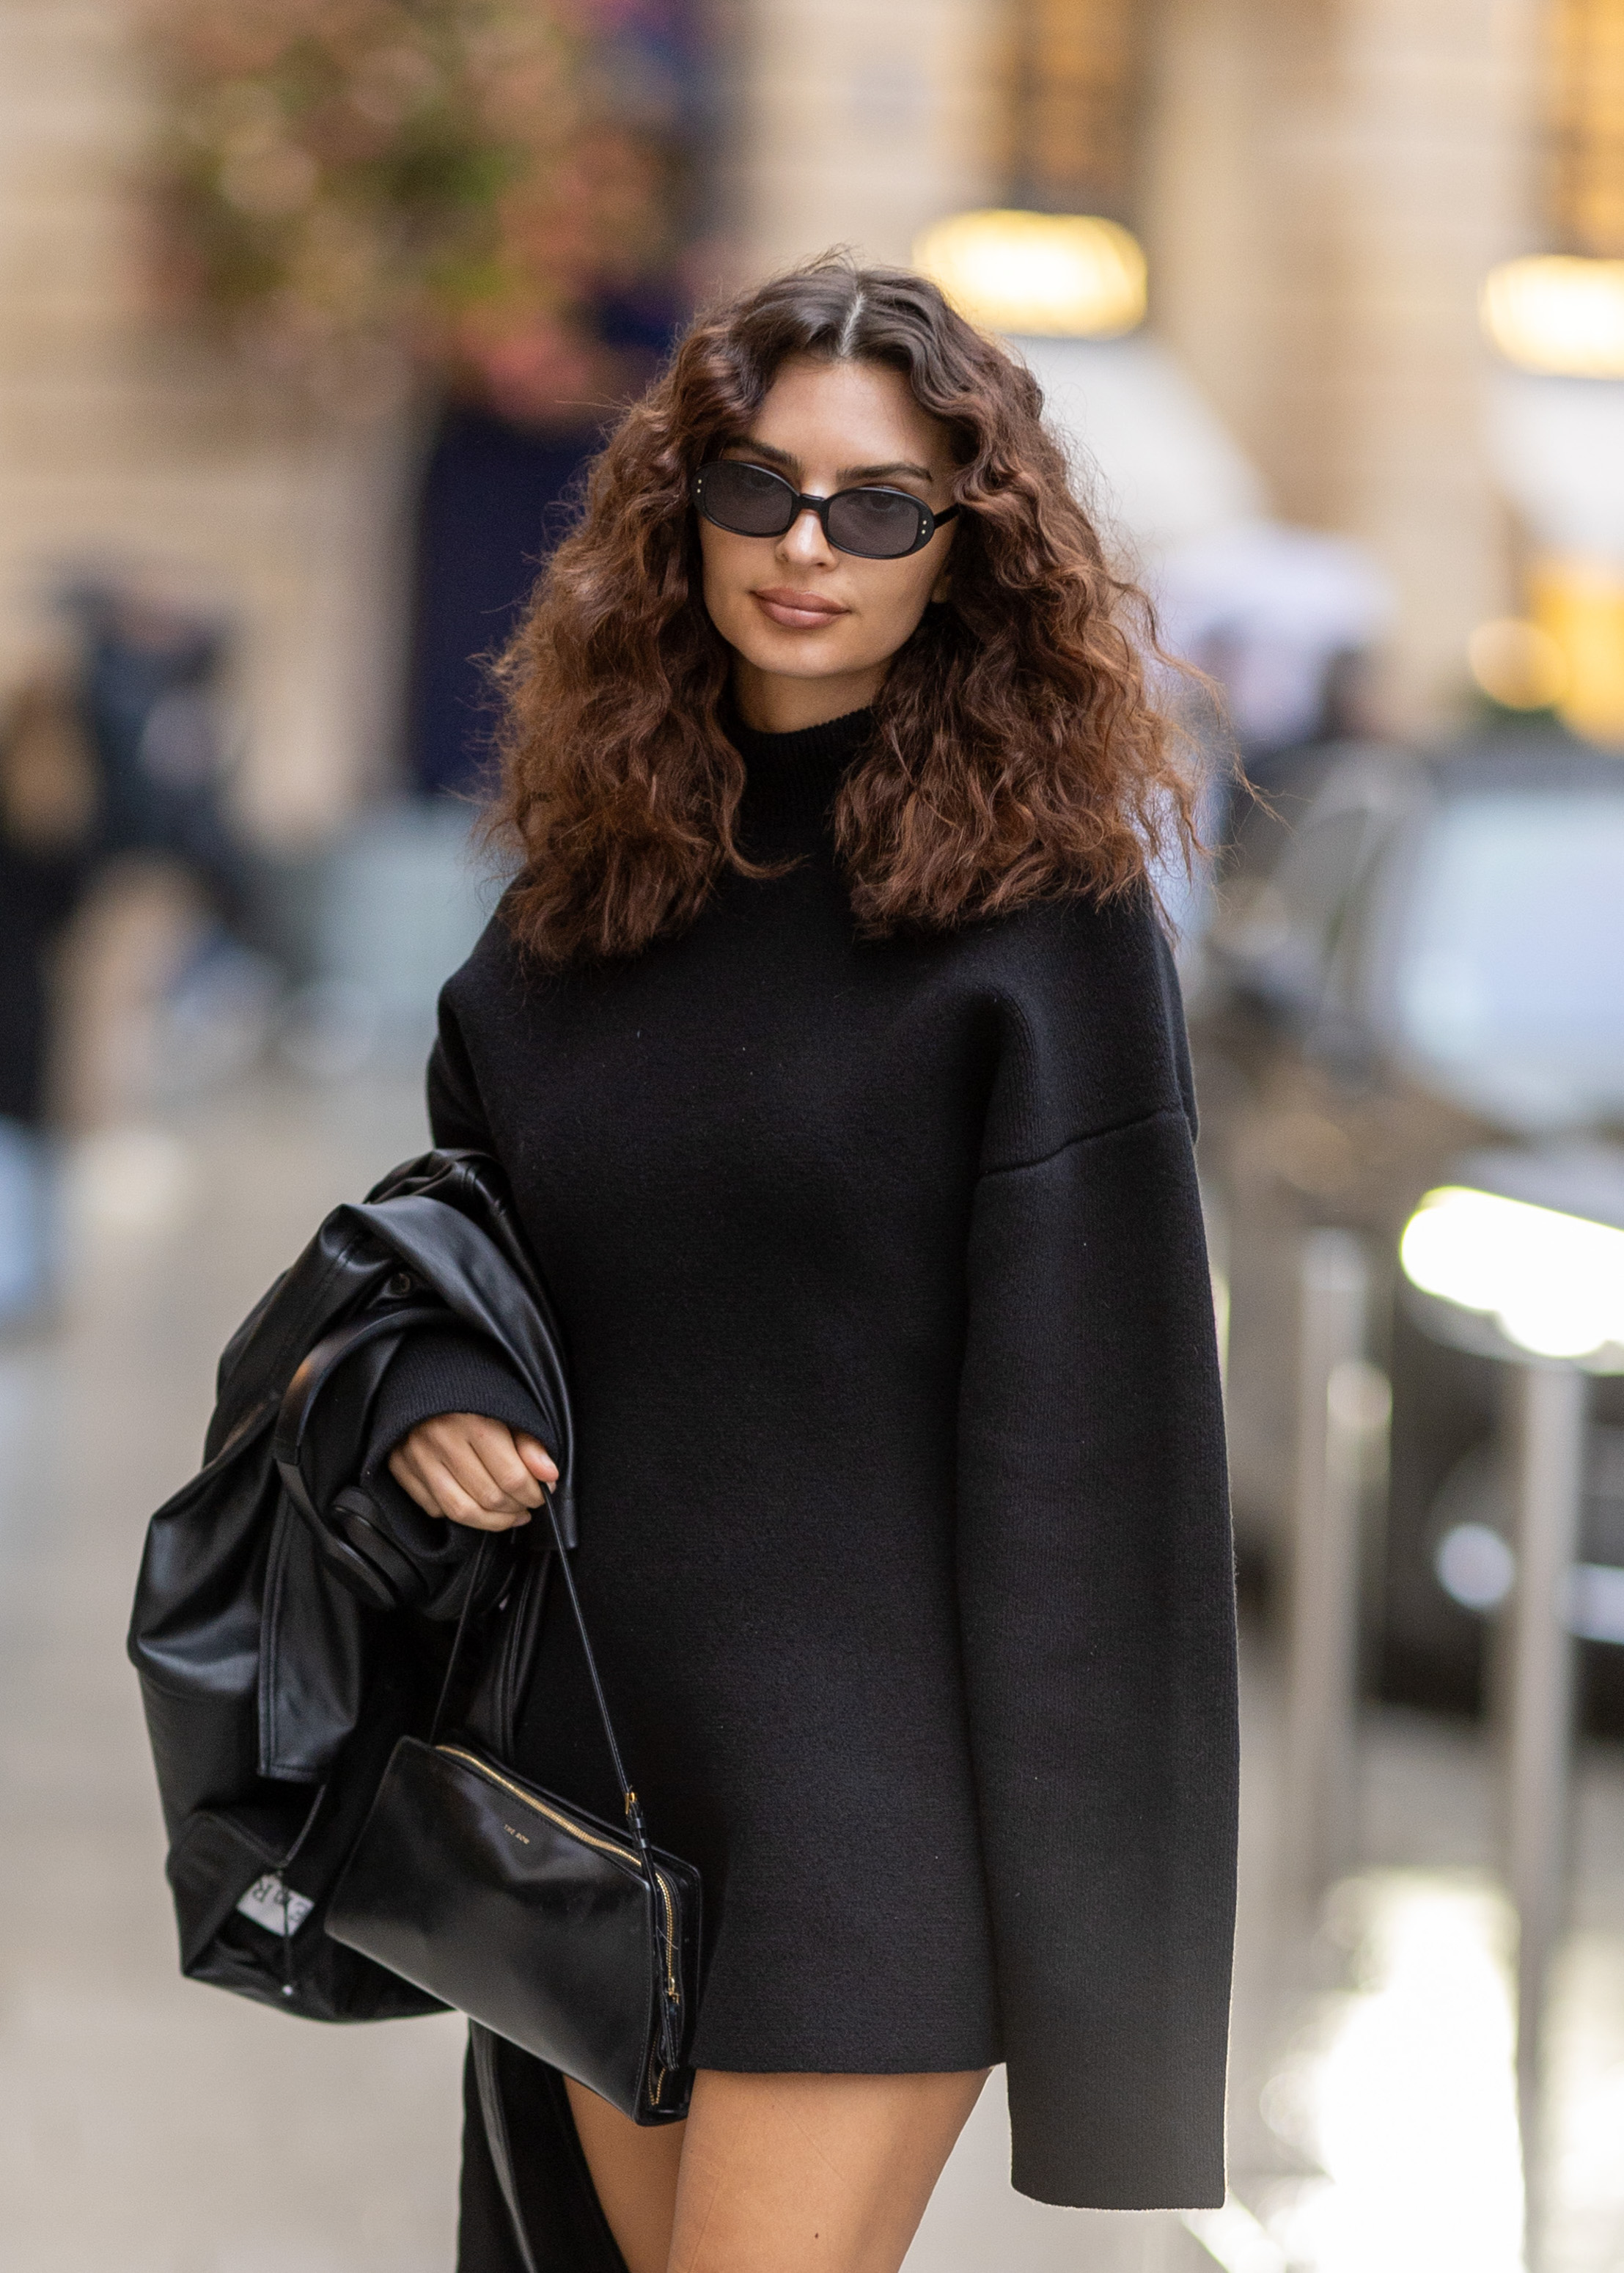 The model opted to go pantsless while wearing an oversized black sweatshirt as she showed off her brand-new hairstyle